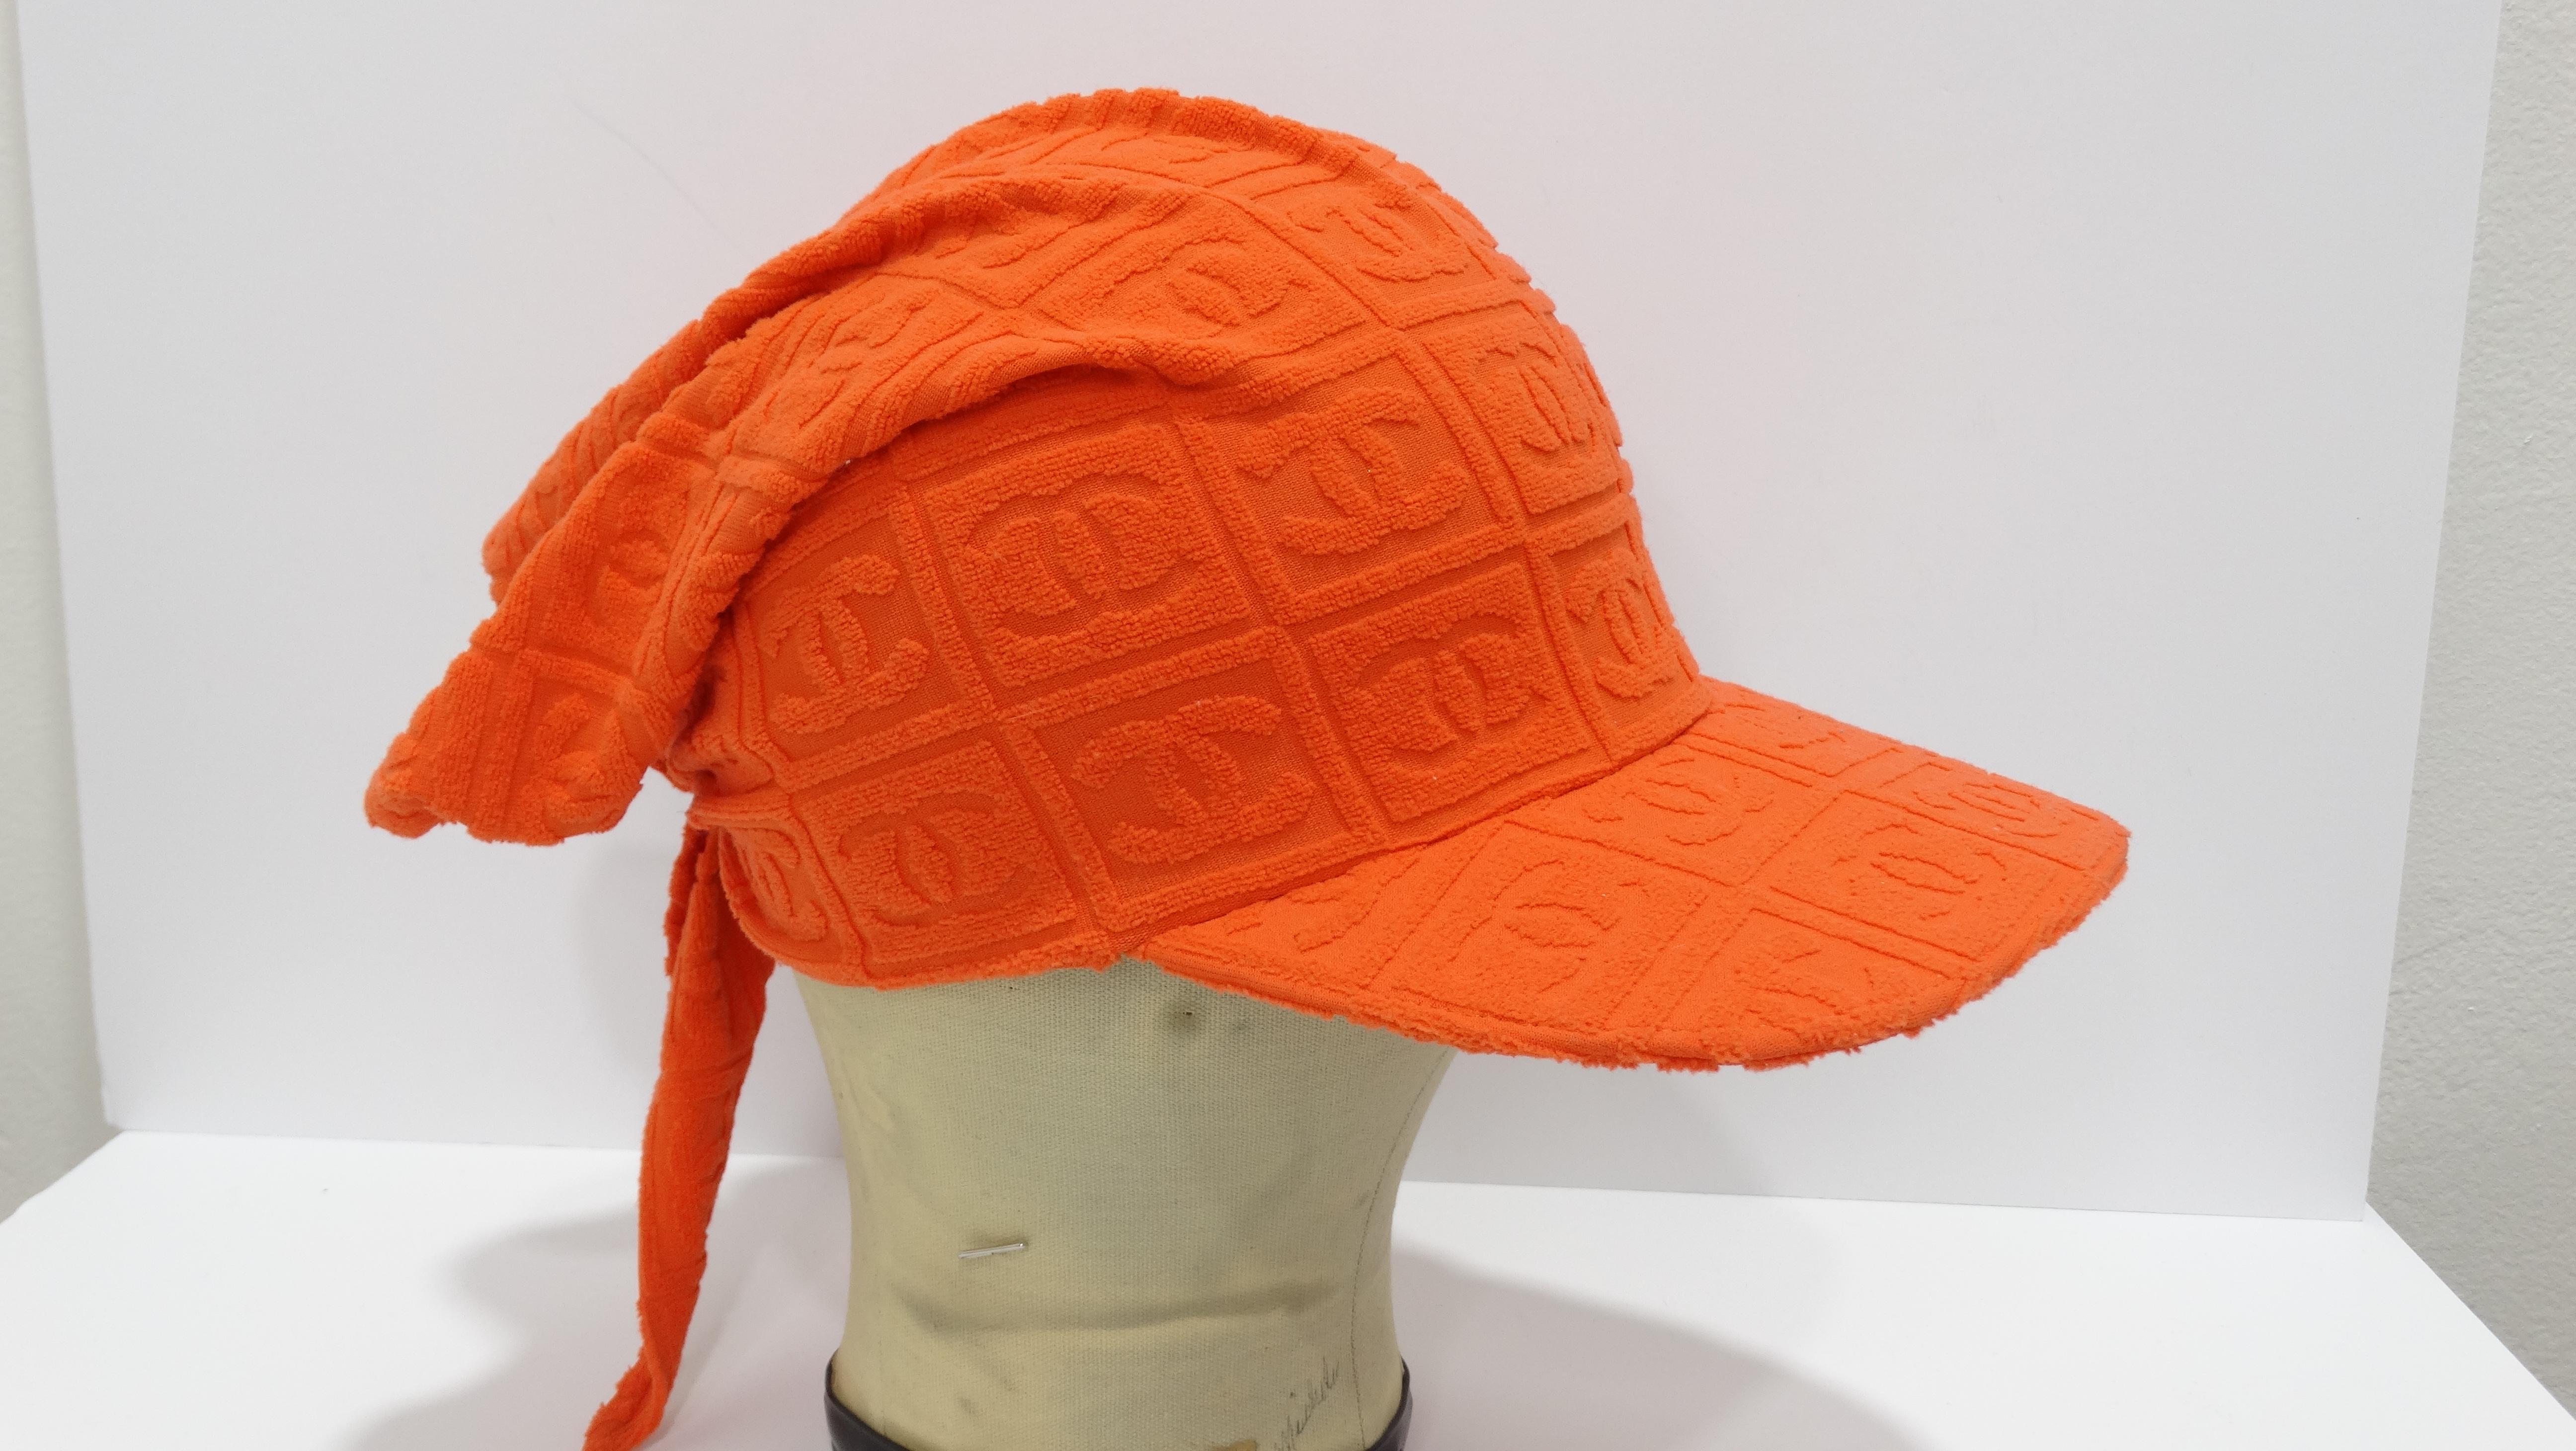 Chanel & Terrycloth collide! Look no further for your new summer time accessory. This unique and bold hat mixes the iconic 